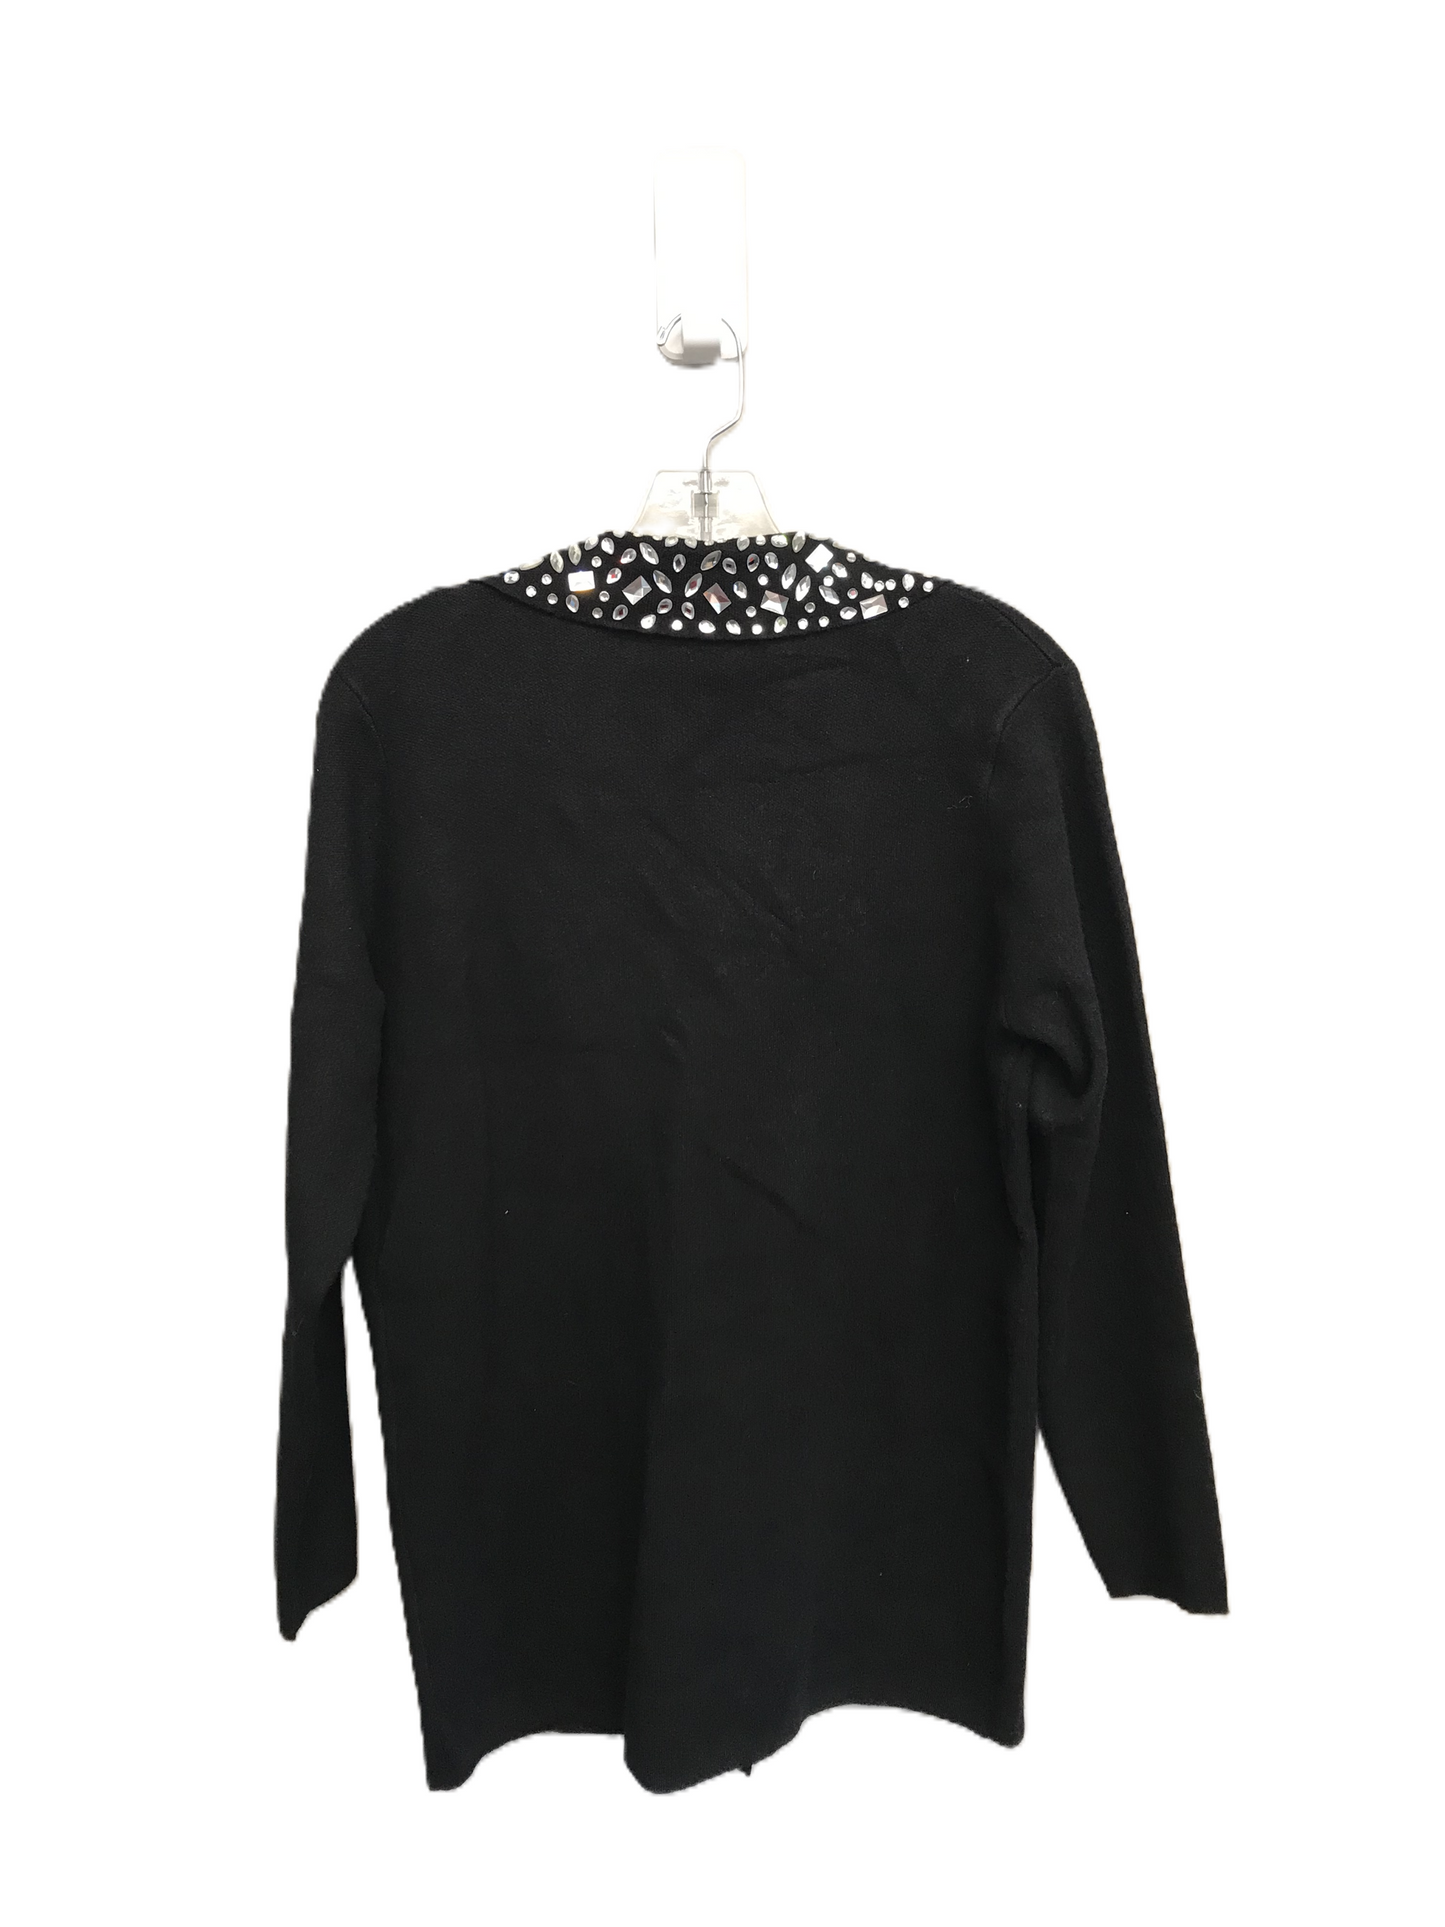 Black Sweater Cardigan By Sioni, Size: S